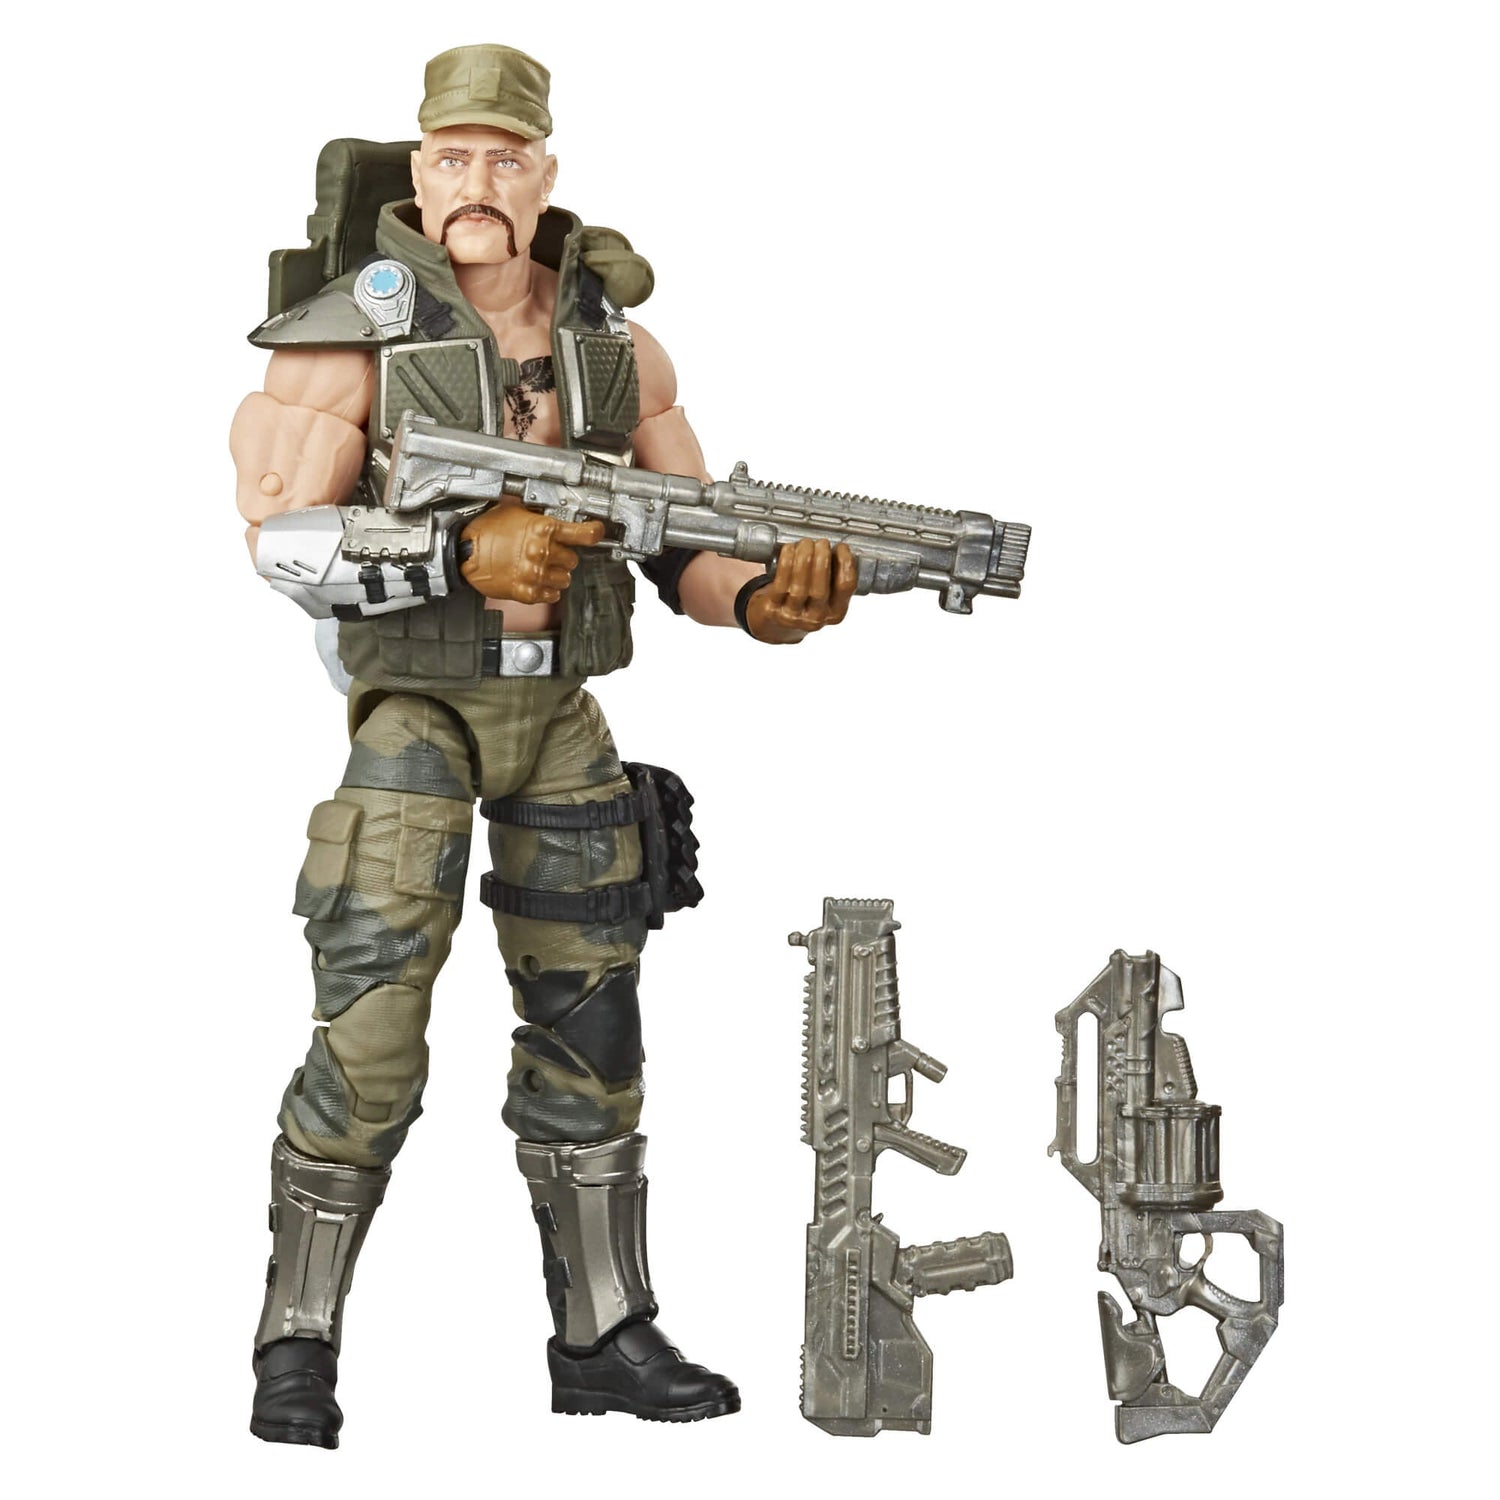 Hasbro G.I. Joe Classified Series Gung Ho action figure with accessories